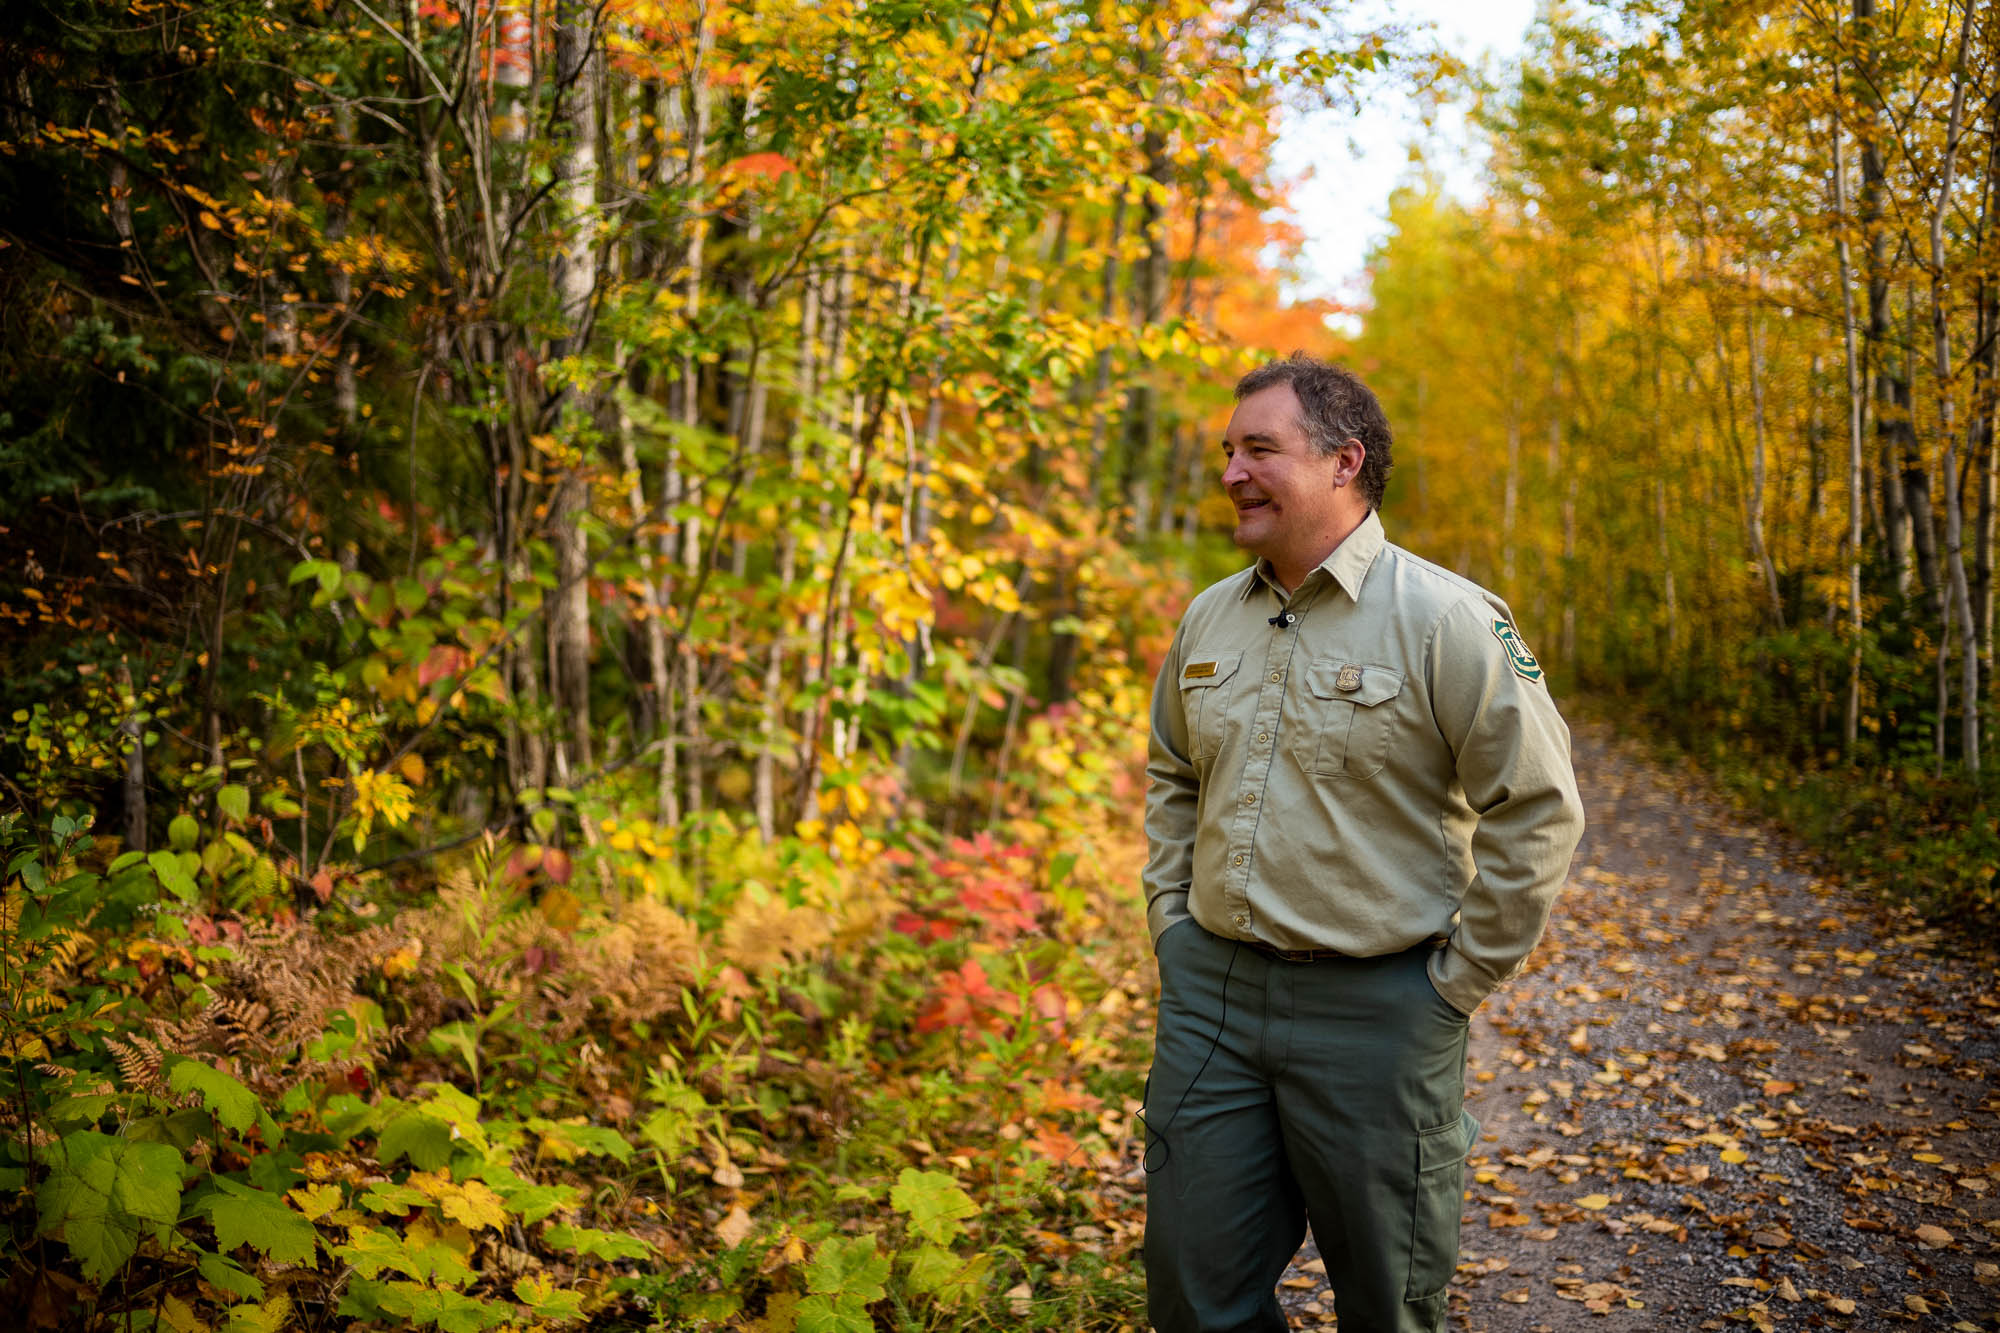 Patrick Johnson, Fire Management Officer for Superior National Forest, stands in the woods